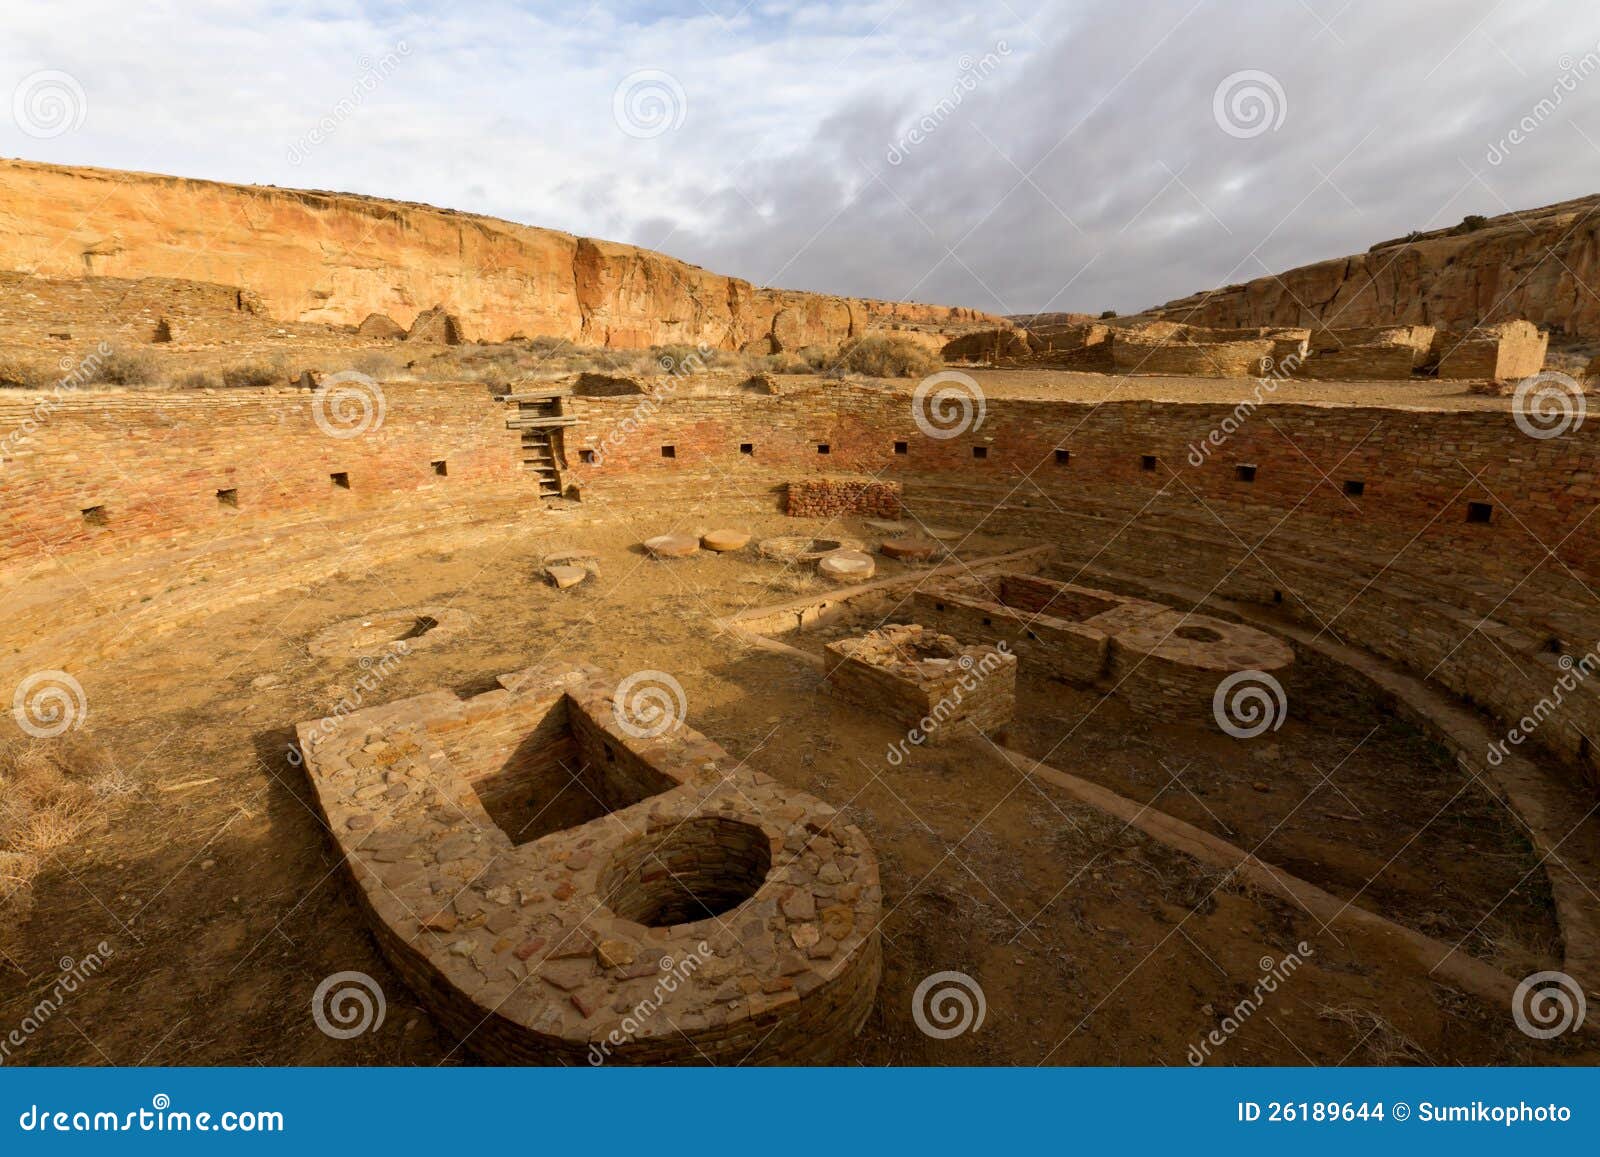 chaco culture national historical park